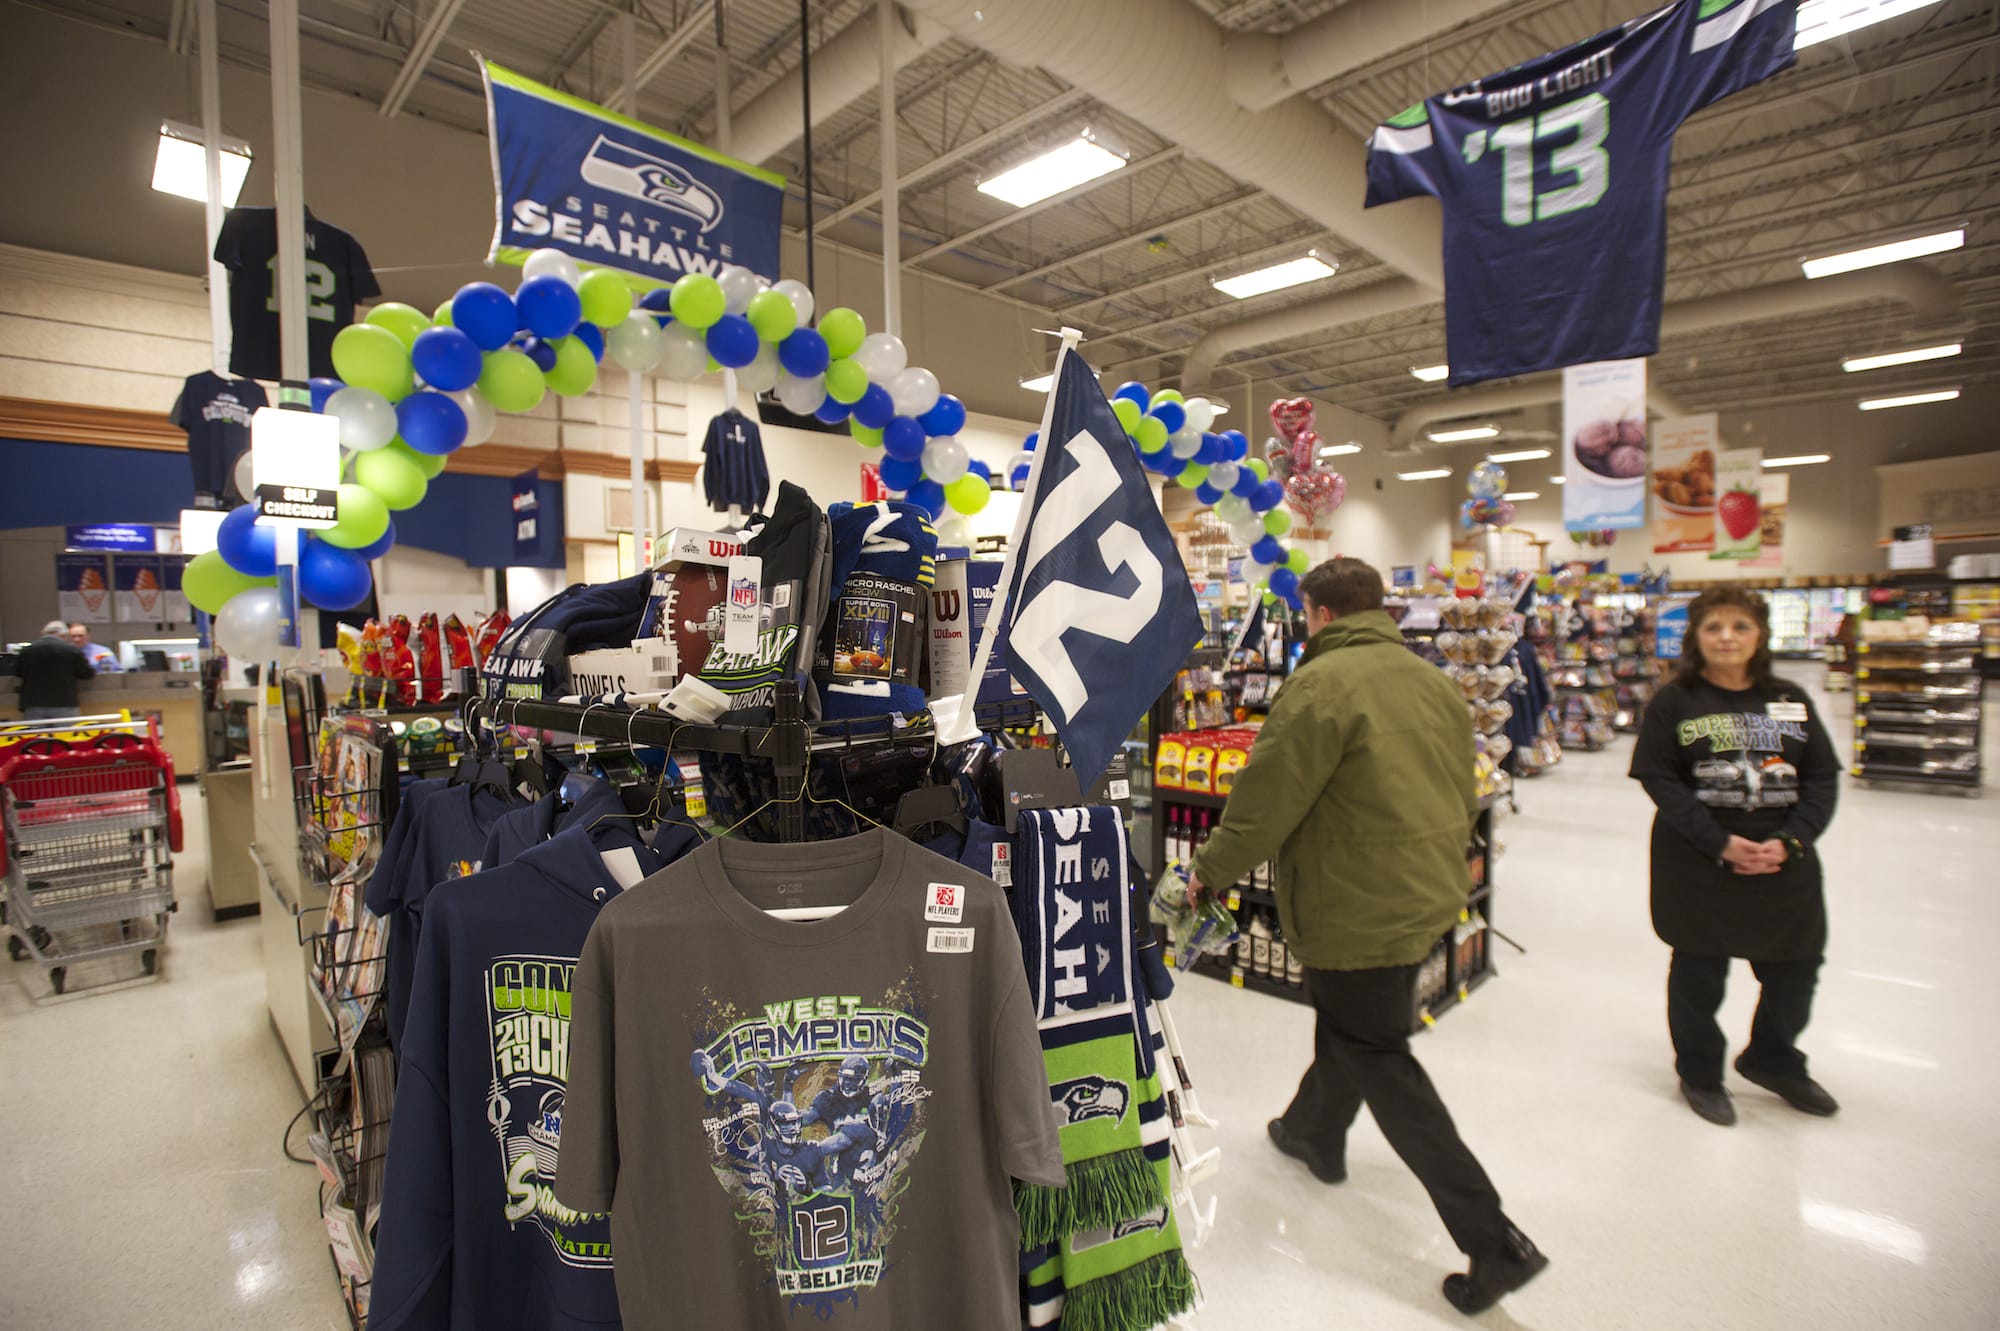 seattle seahawks official store